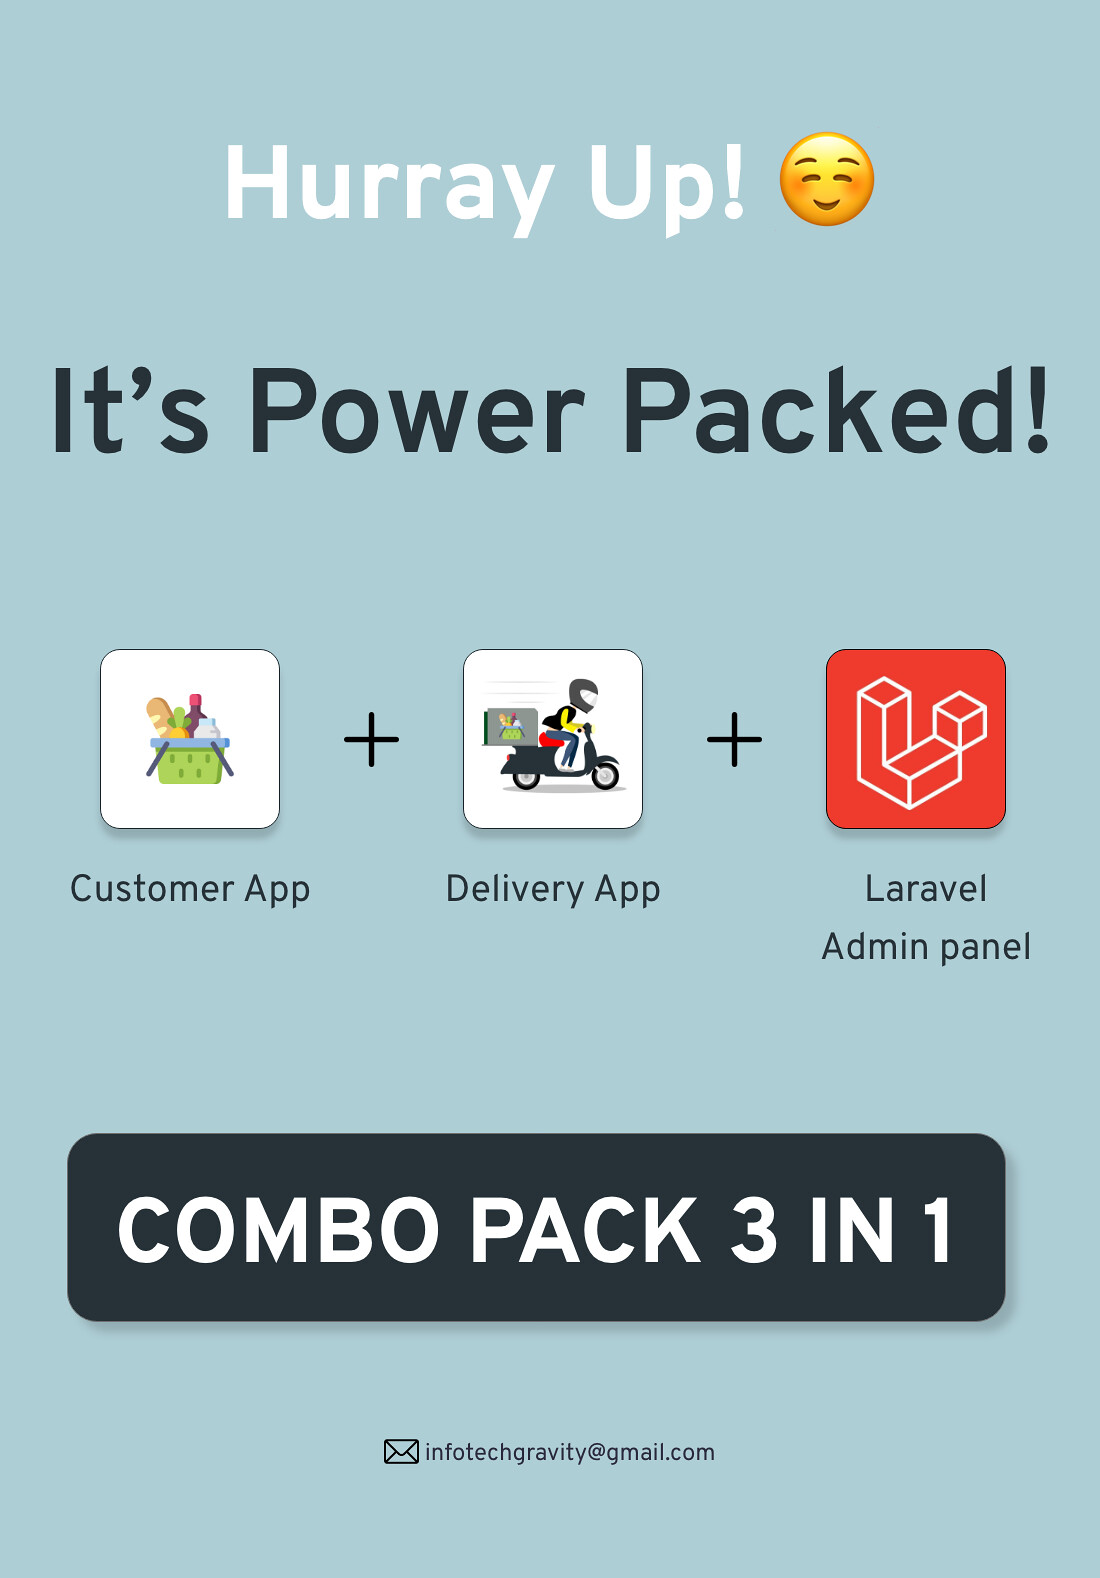 Single Grocery, Food, Pharmacy Store iOS User & Delivery Boy Apps With Backend Admin Panel - 3